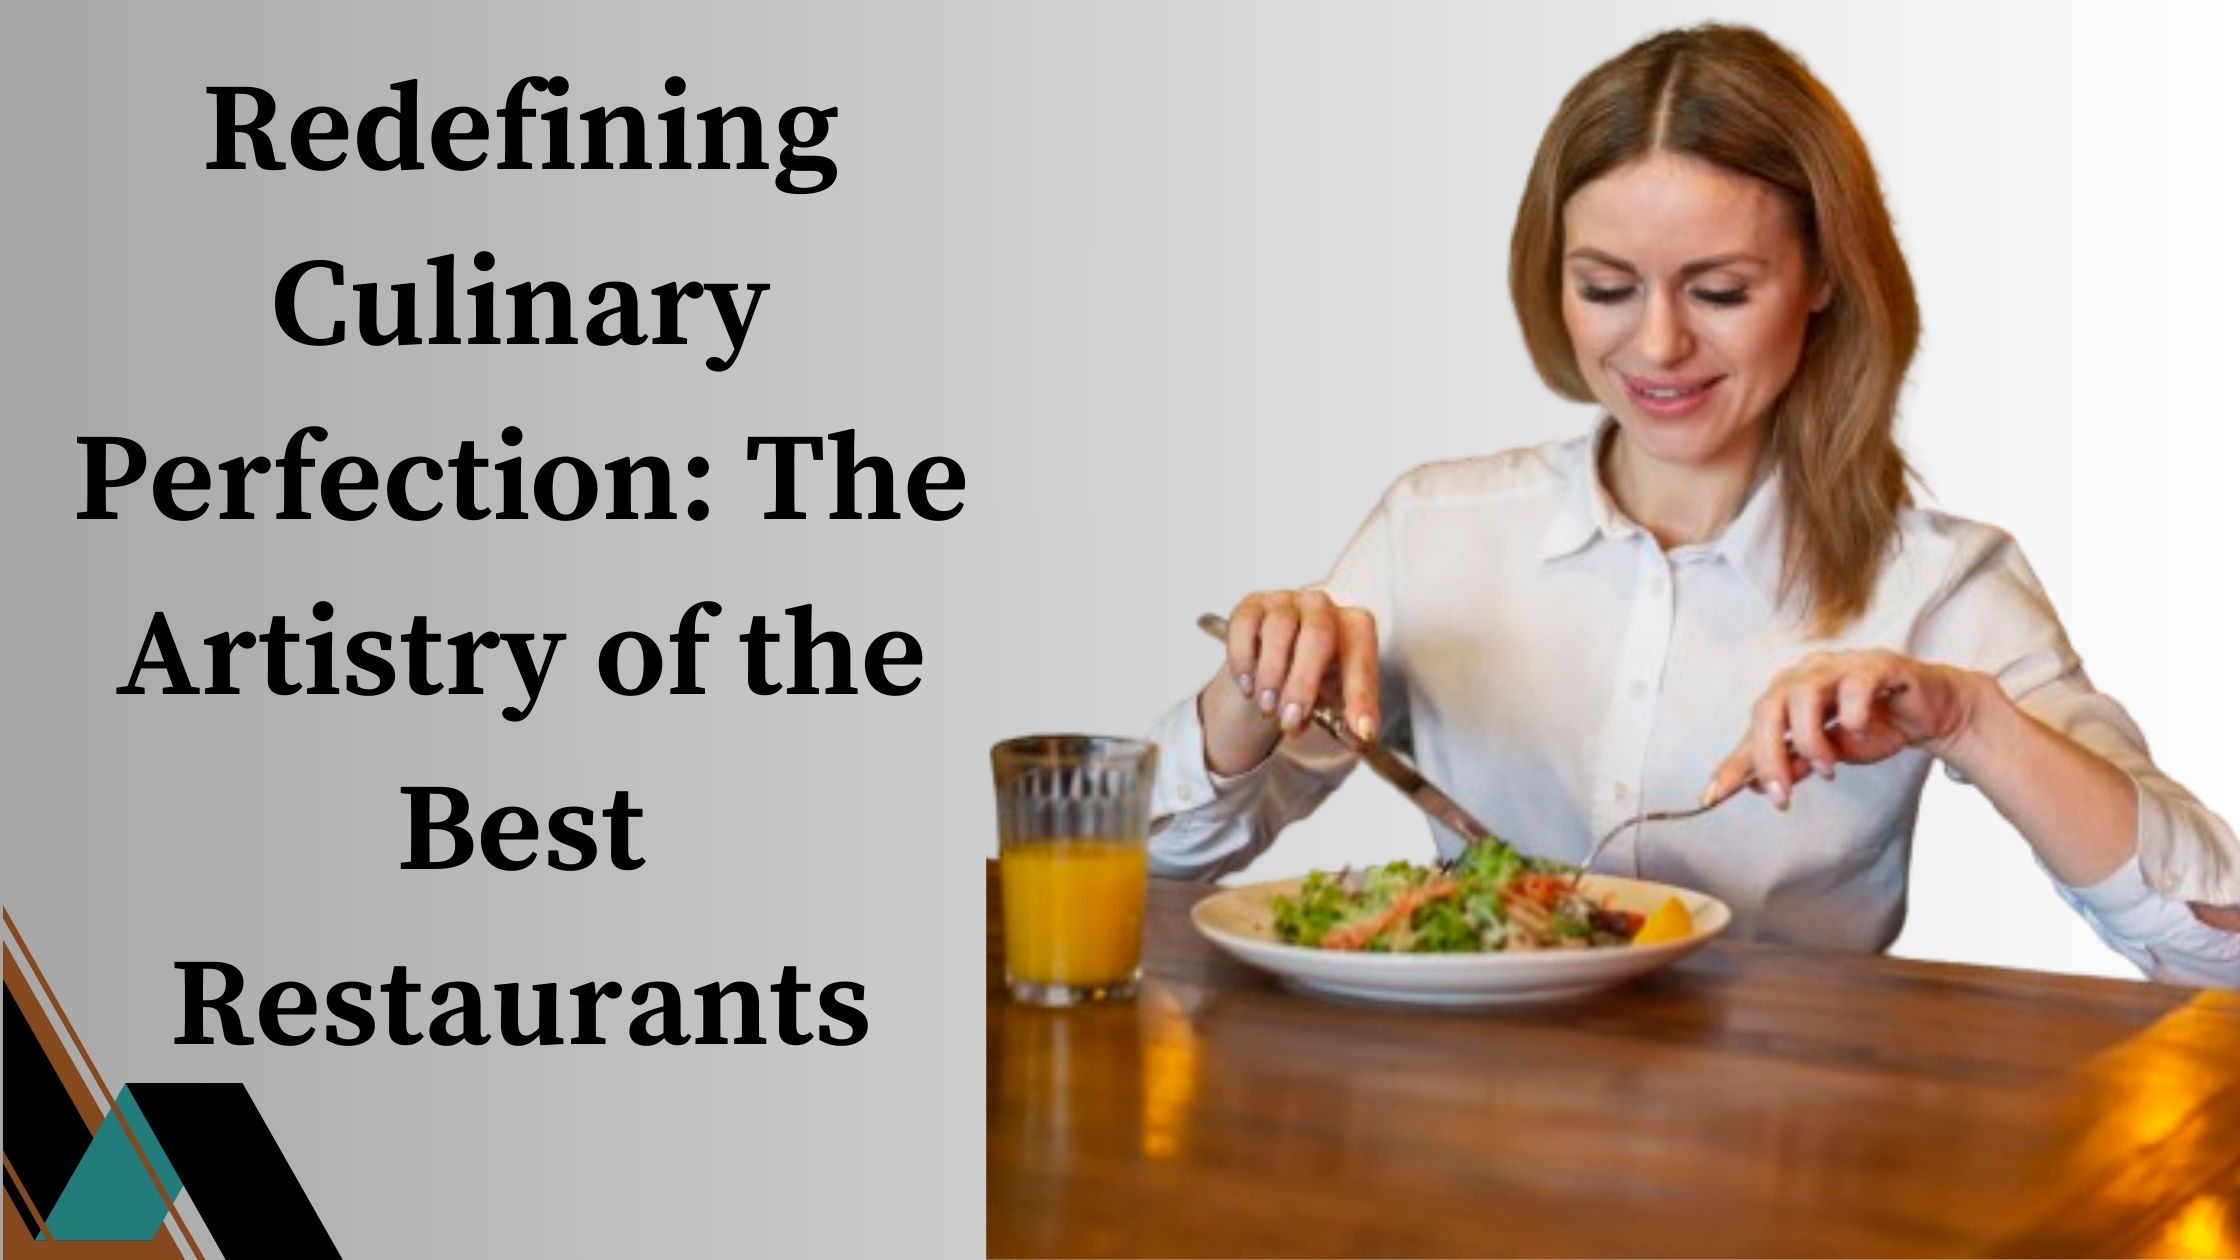 Redefining Culinary Perfection: The Artistry of the Best Restaurants